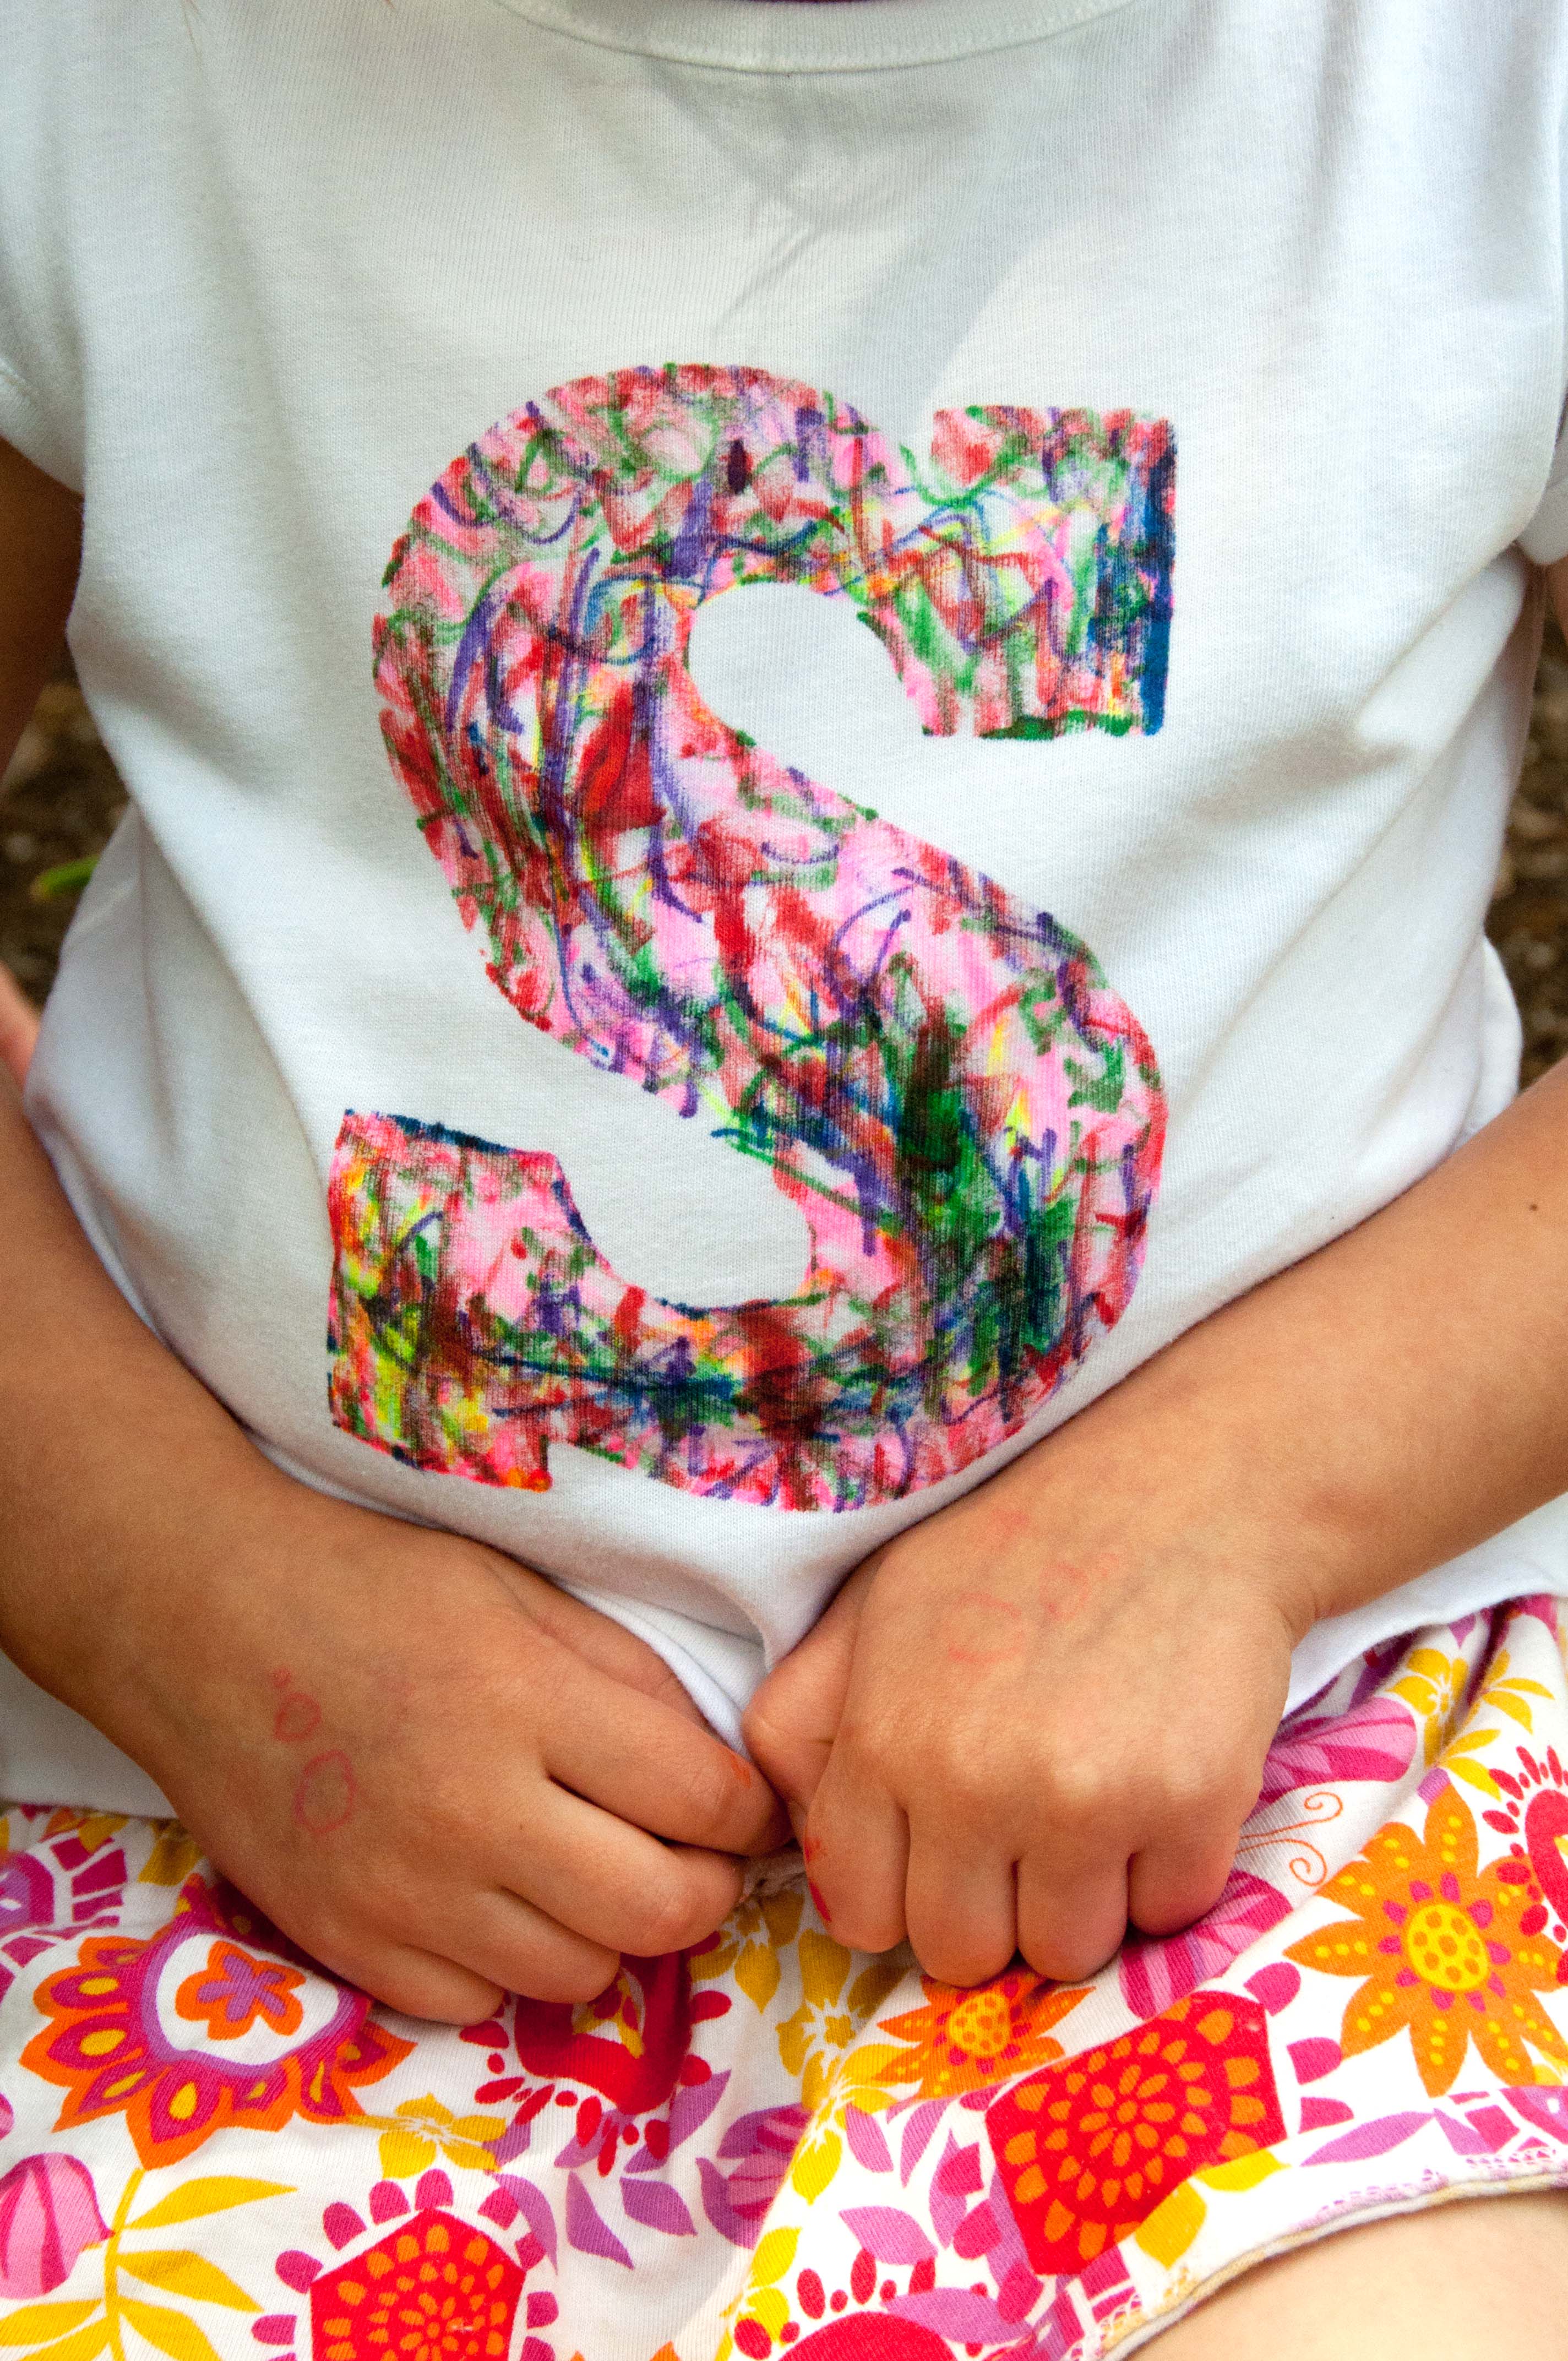 Craft bold, colorful 4th of July tie-dye t-shirts with Cricut